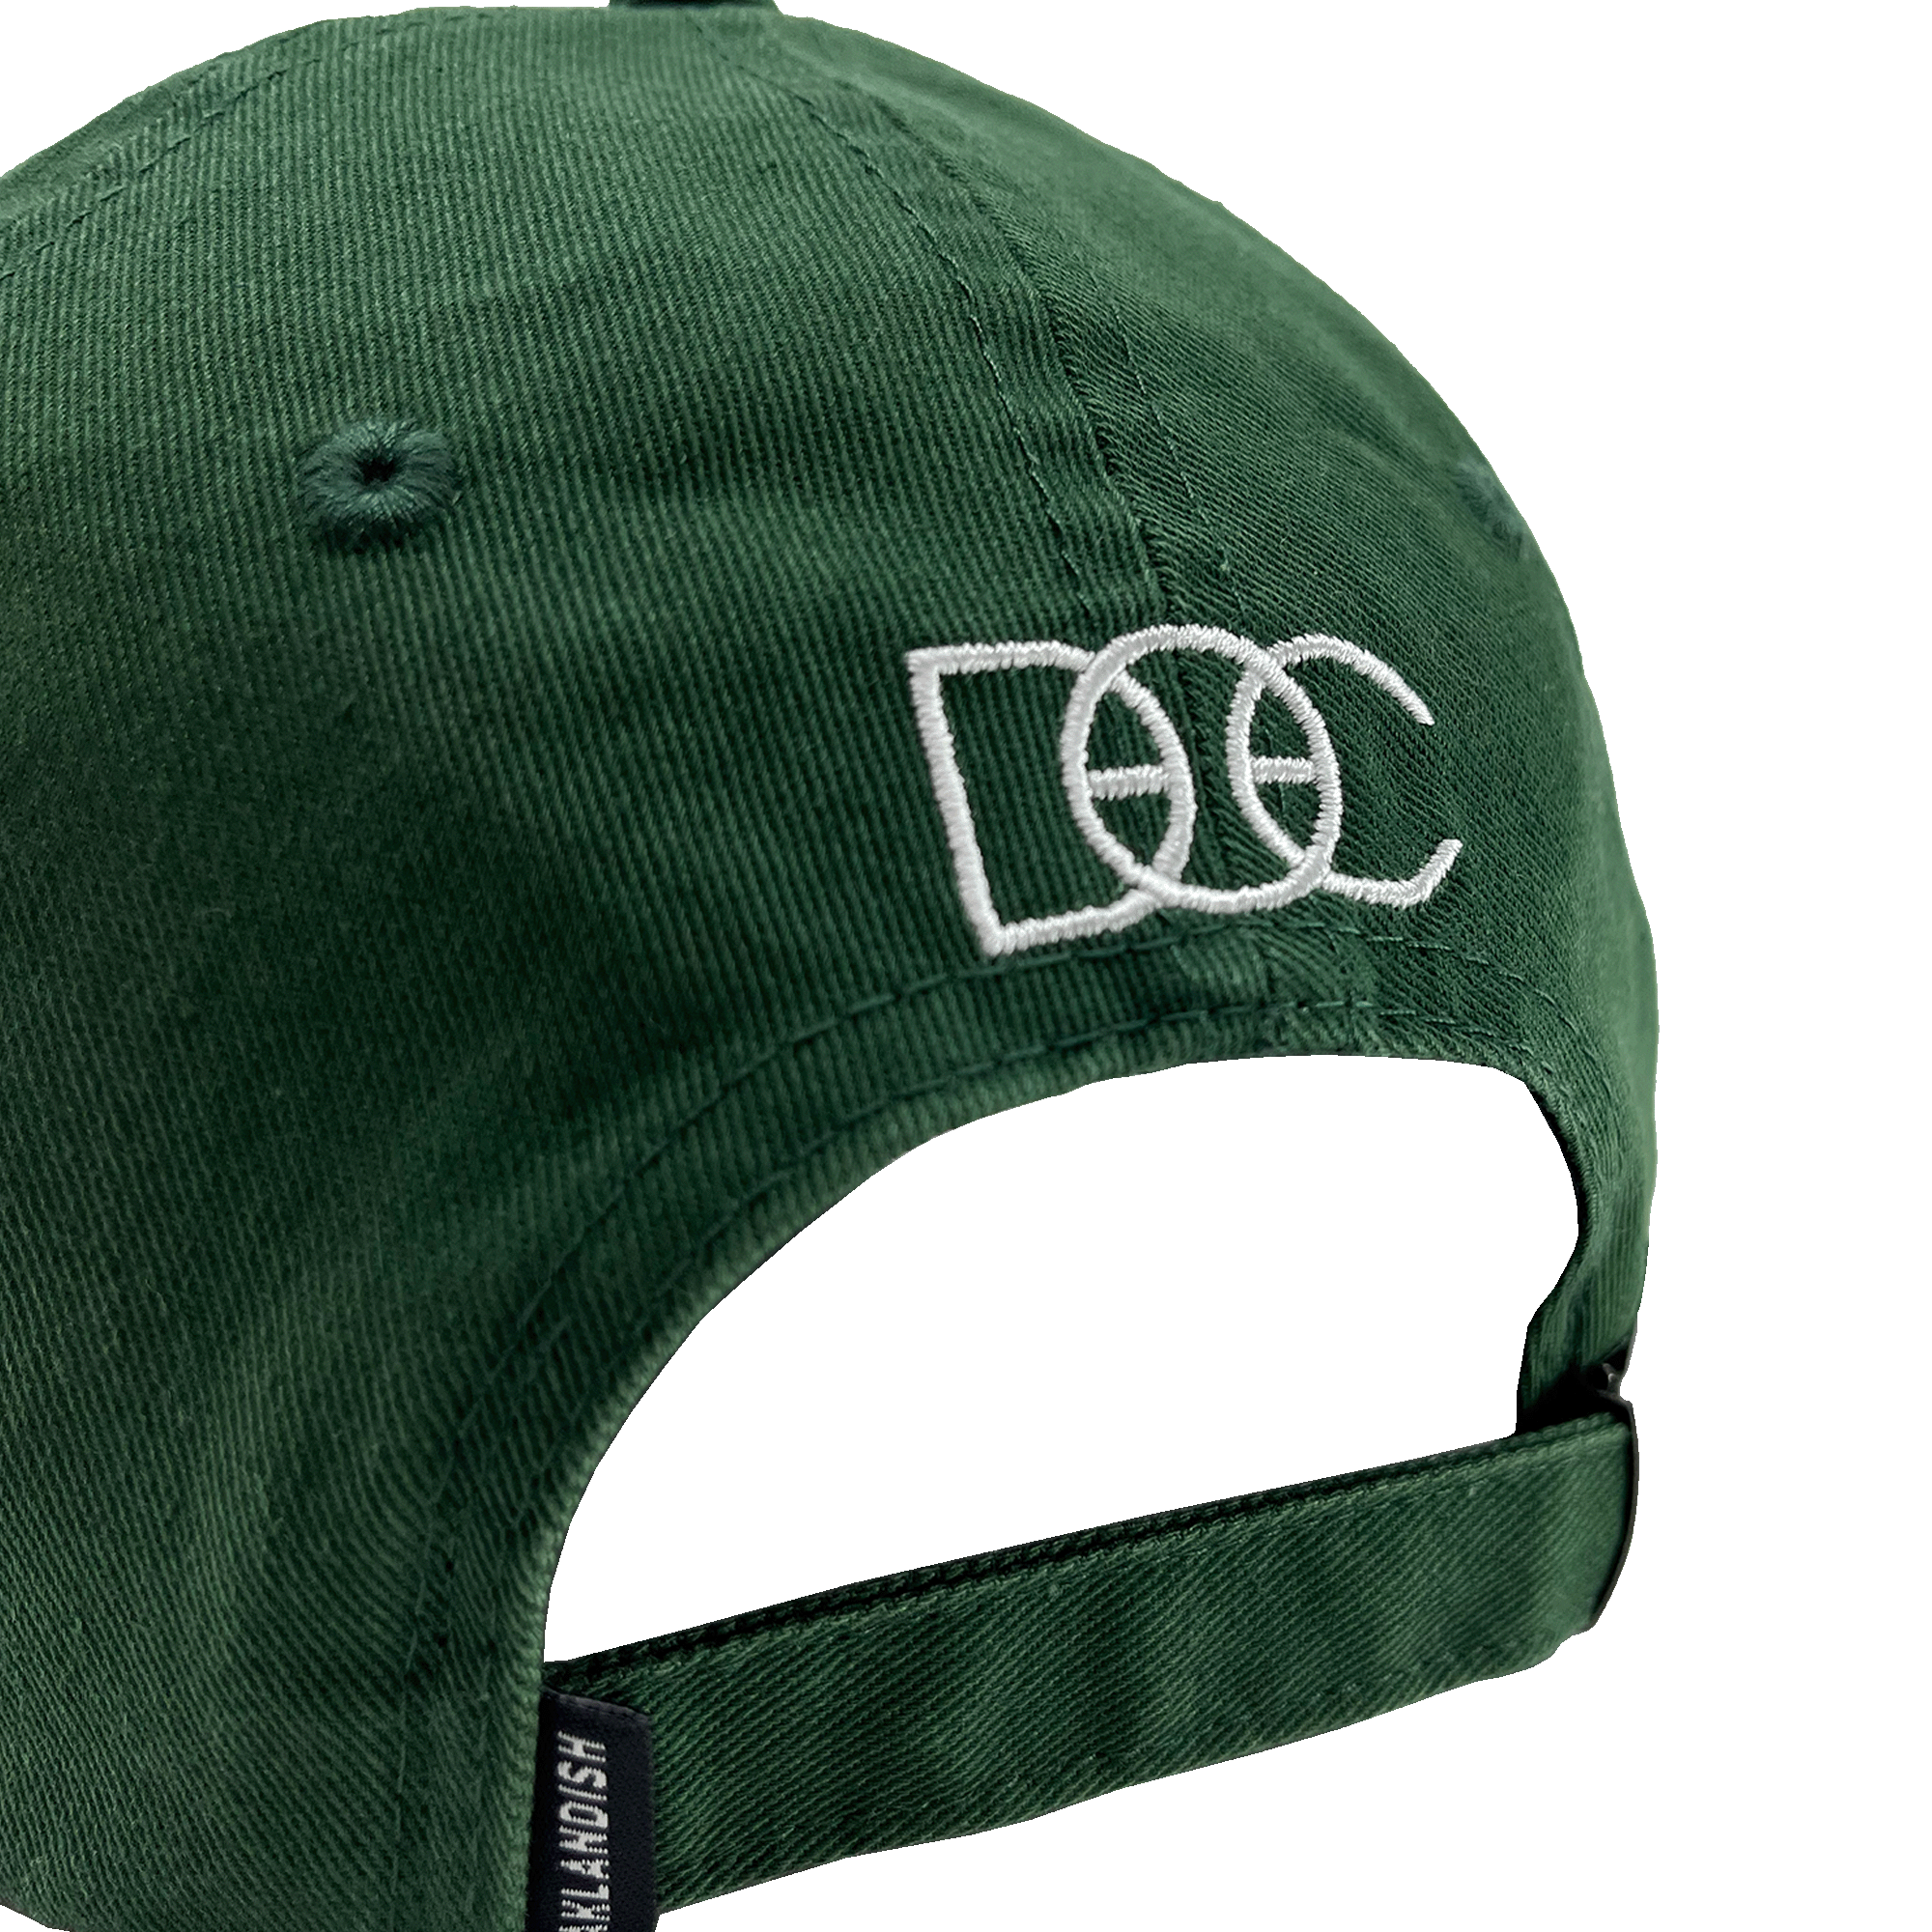 Angled back view of green Oakland Dad Hat designed by Dustin O. Canalin white embroidered DOC wordmark, adjustable strapback, and small Oaklandish wordmark tag.